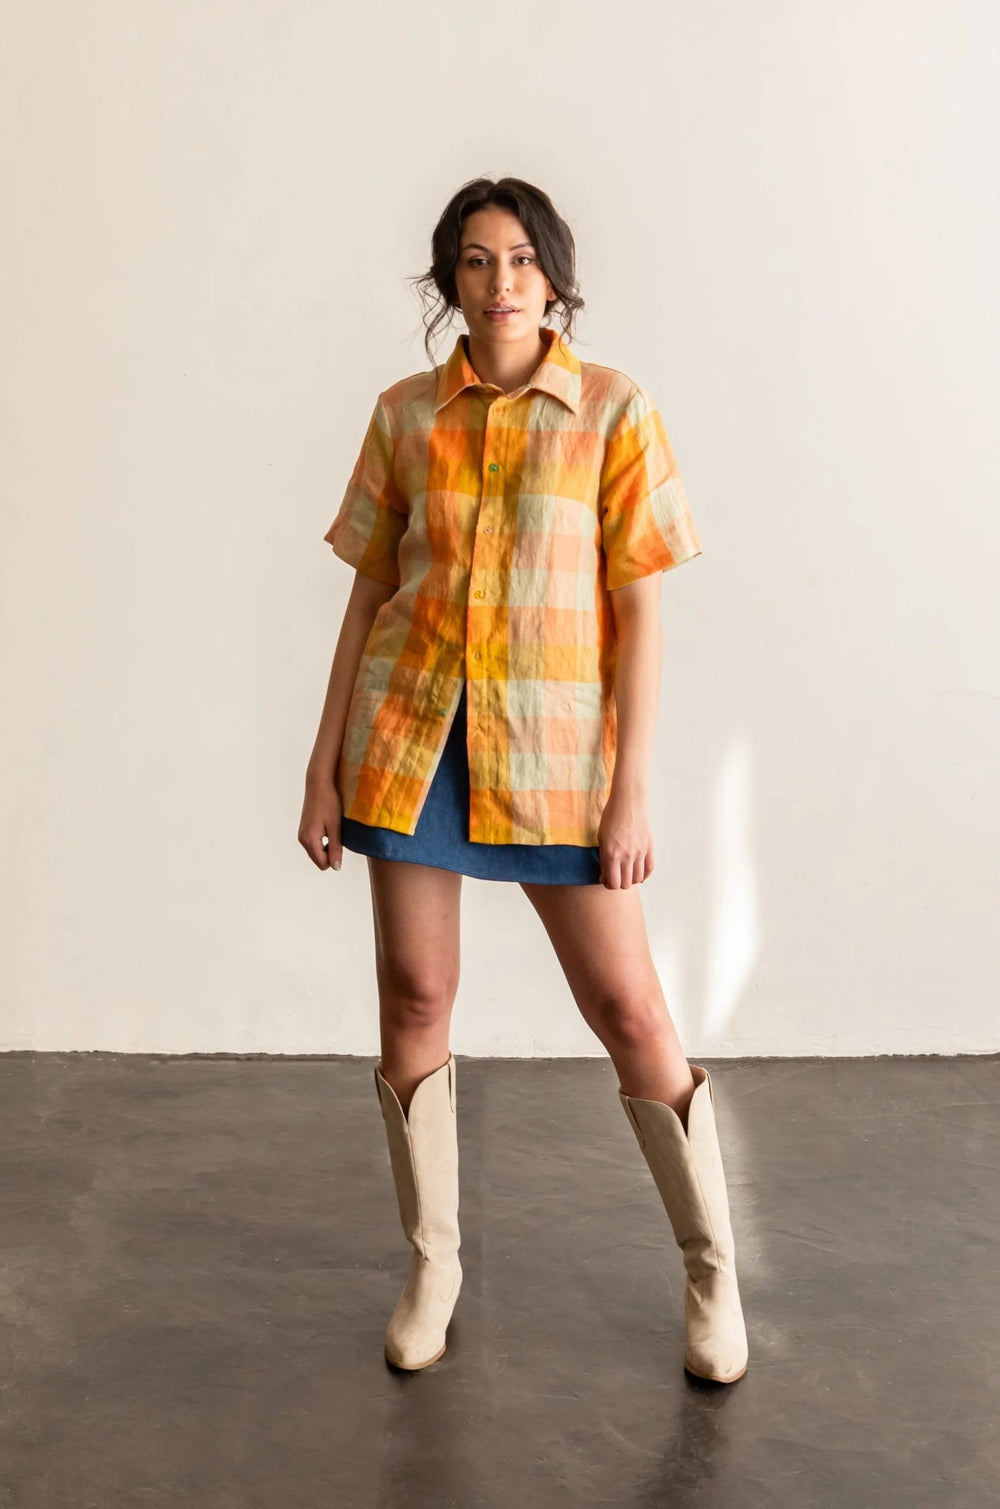 Woman wearing the Butano Button Up sewing pattern from Friday Pattern Company on The Fold Line. A shirt pattern made in linen, cotton, twill, denim, rayon challis, or silk fabric, featuring a relaxed fit, collar and stand, button front, bust darts, and sh